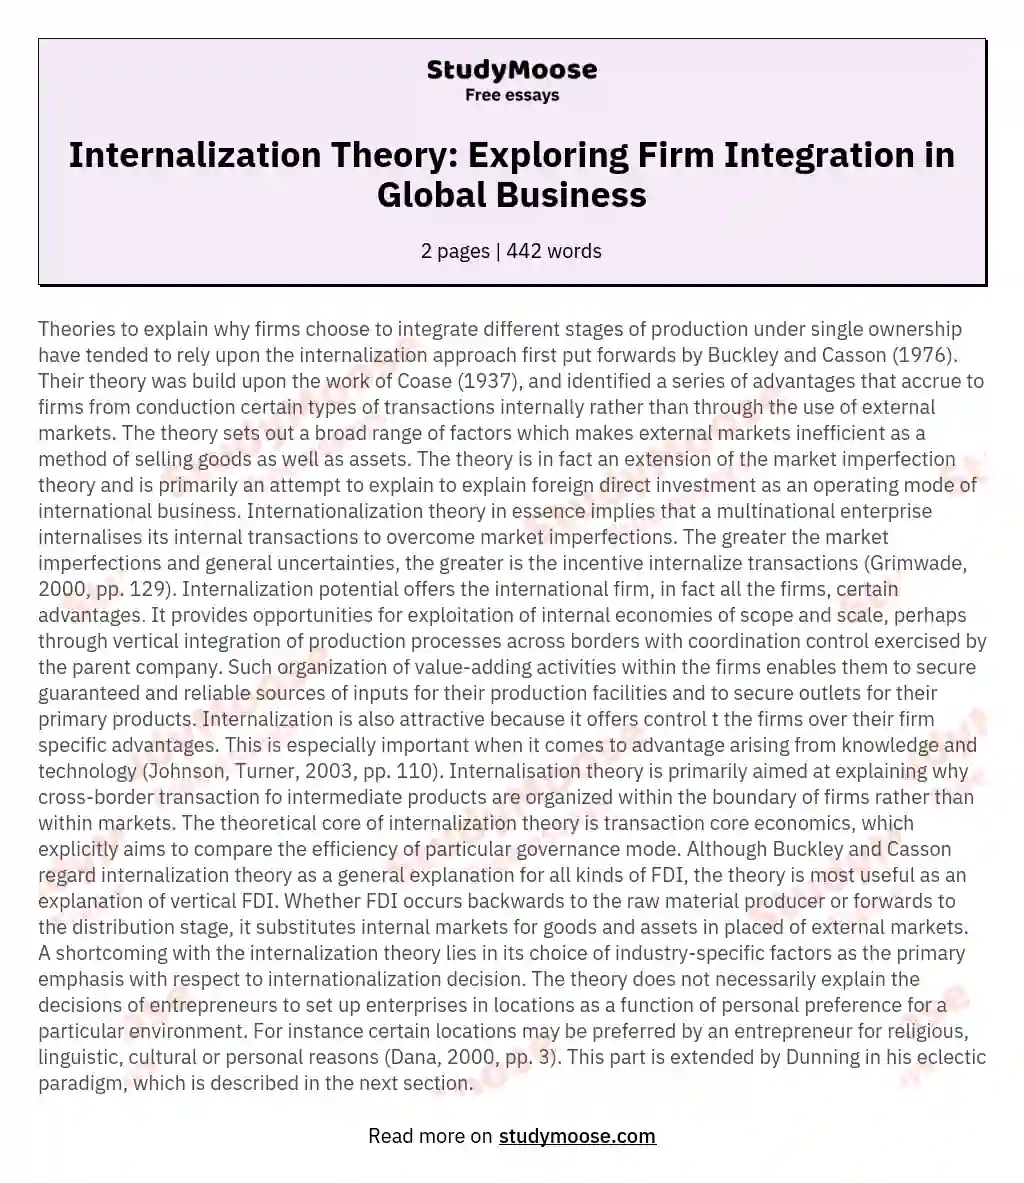 Internalization Theory: Exploring Firm Integration in Global Business essay